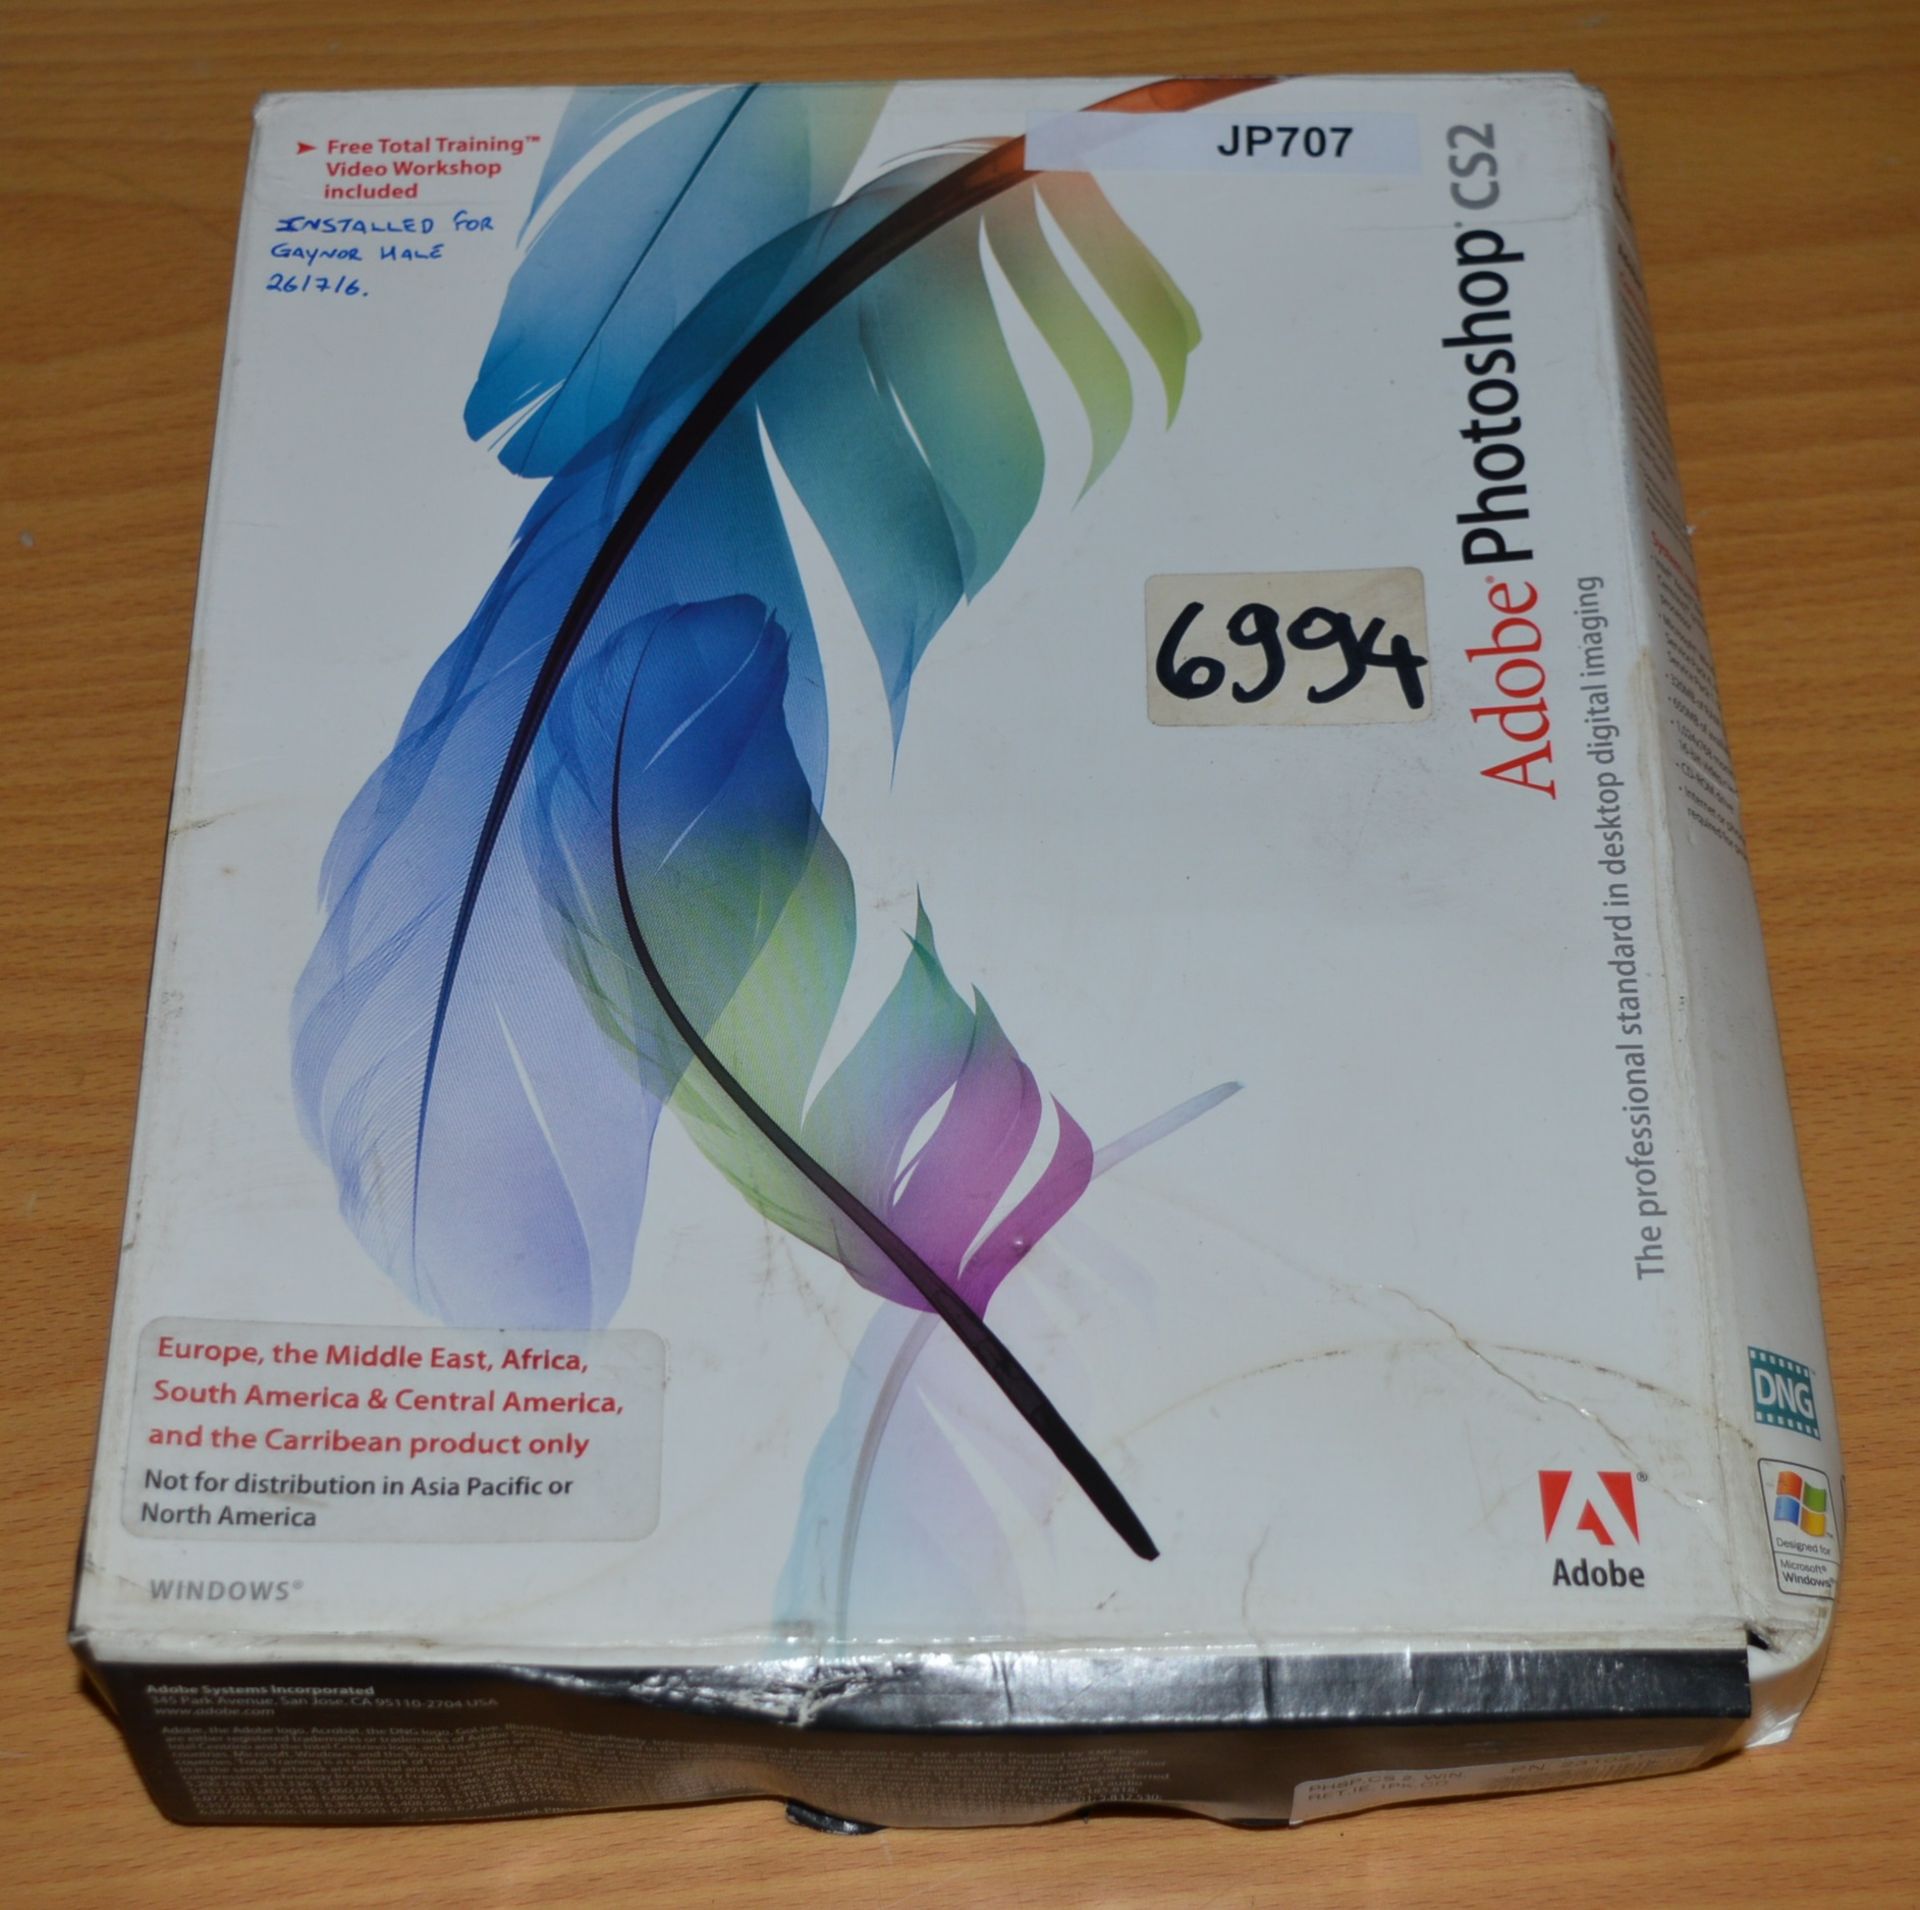 1 x Adobe Photoshop CS2 Computer Software - Boxed With Instructions, Software CD and Product key -